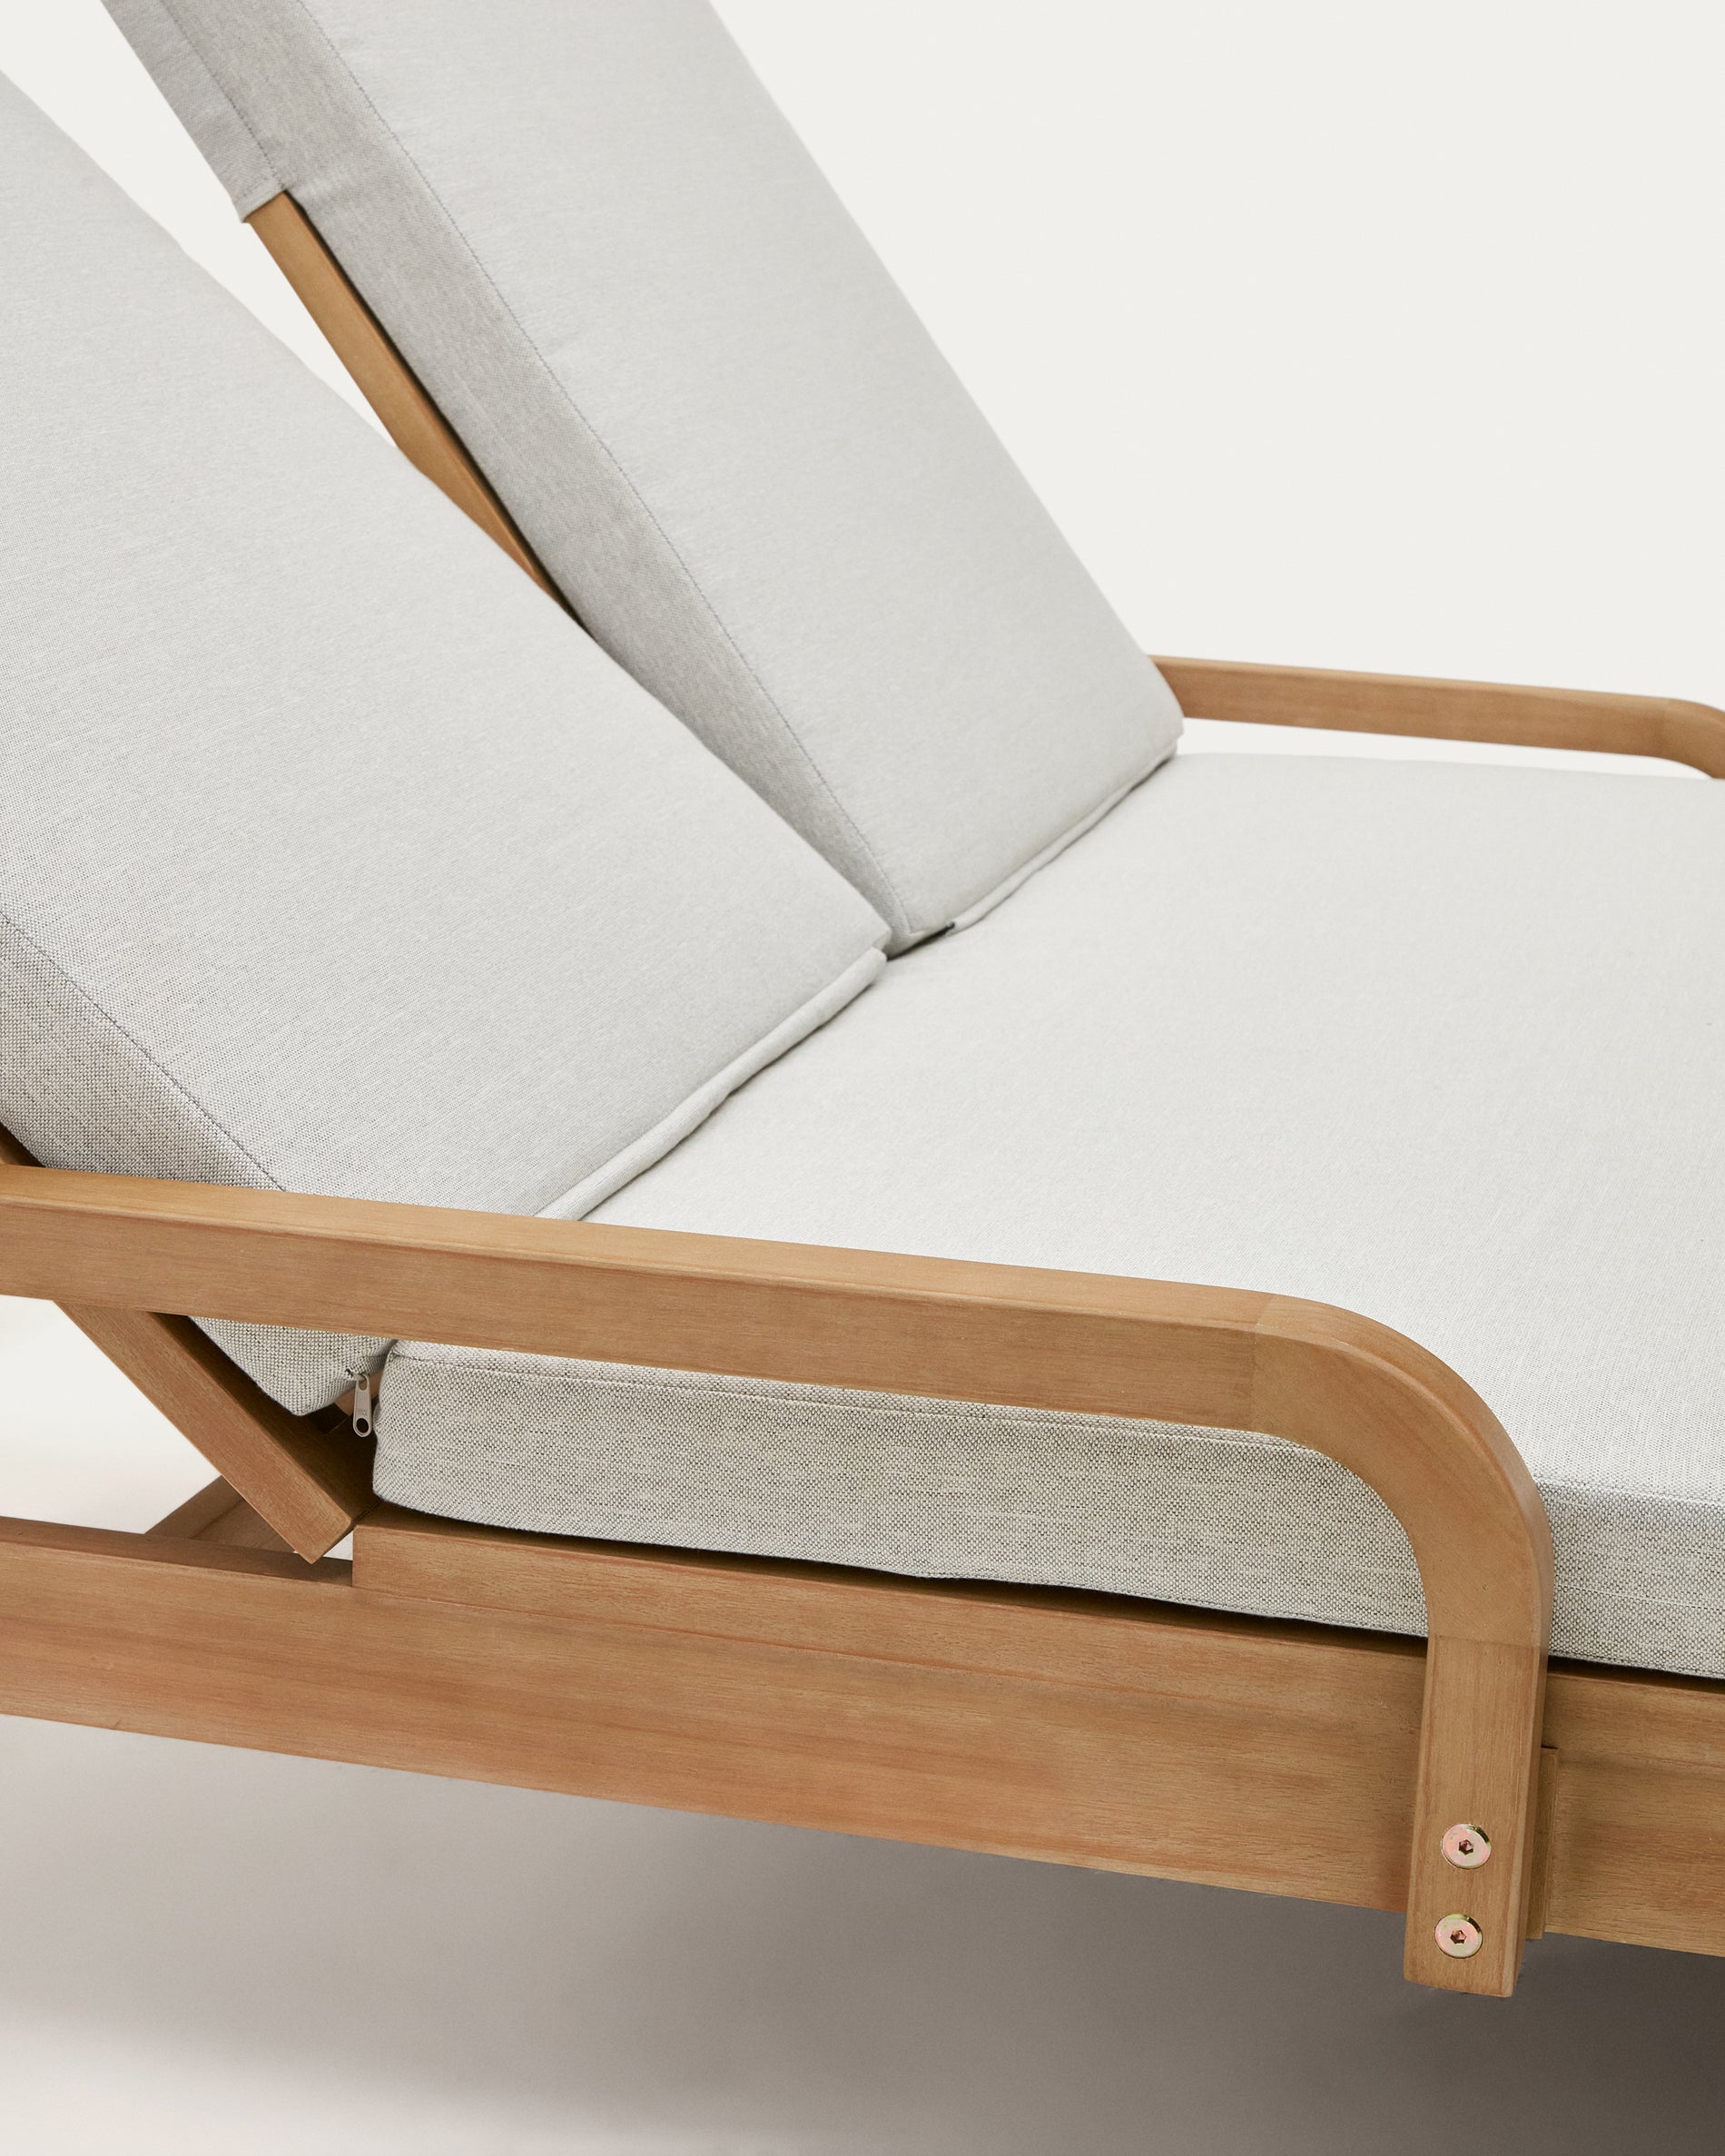 Sonsaura double sunbed, made of 100% FSC certified solid eucalyptus wood